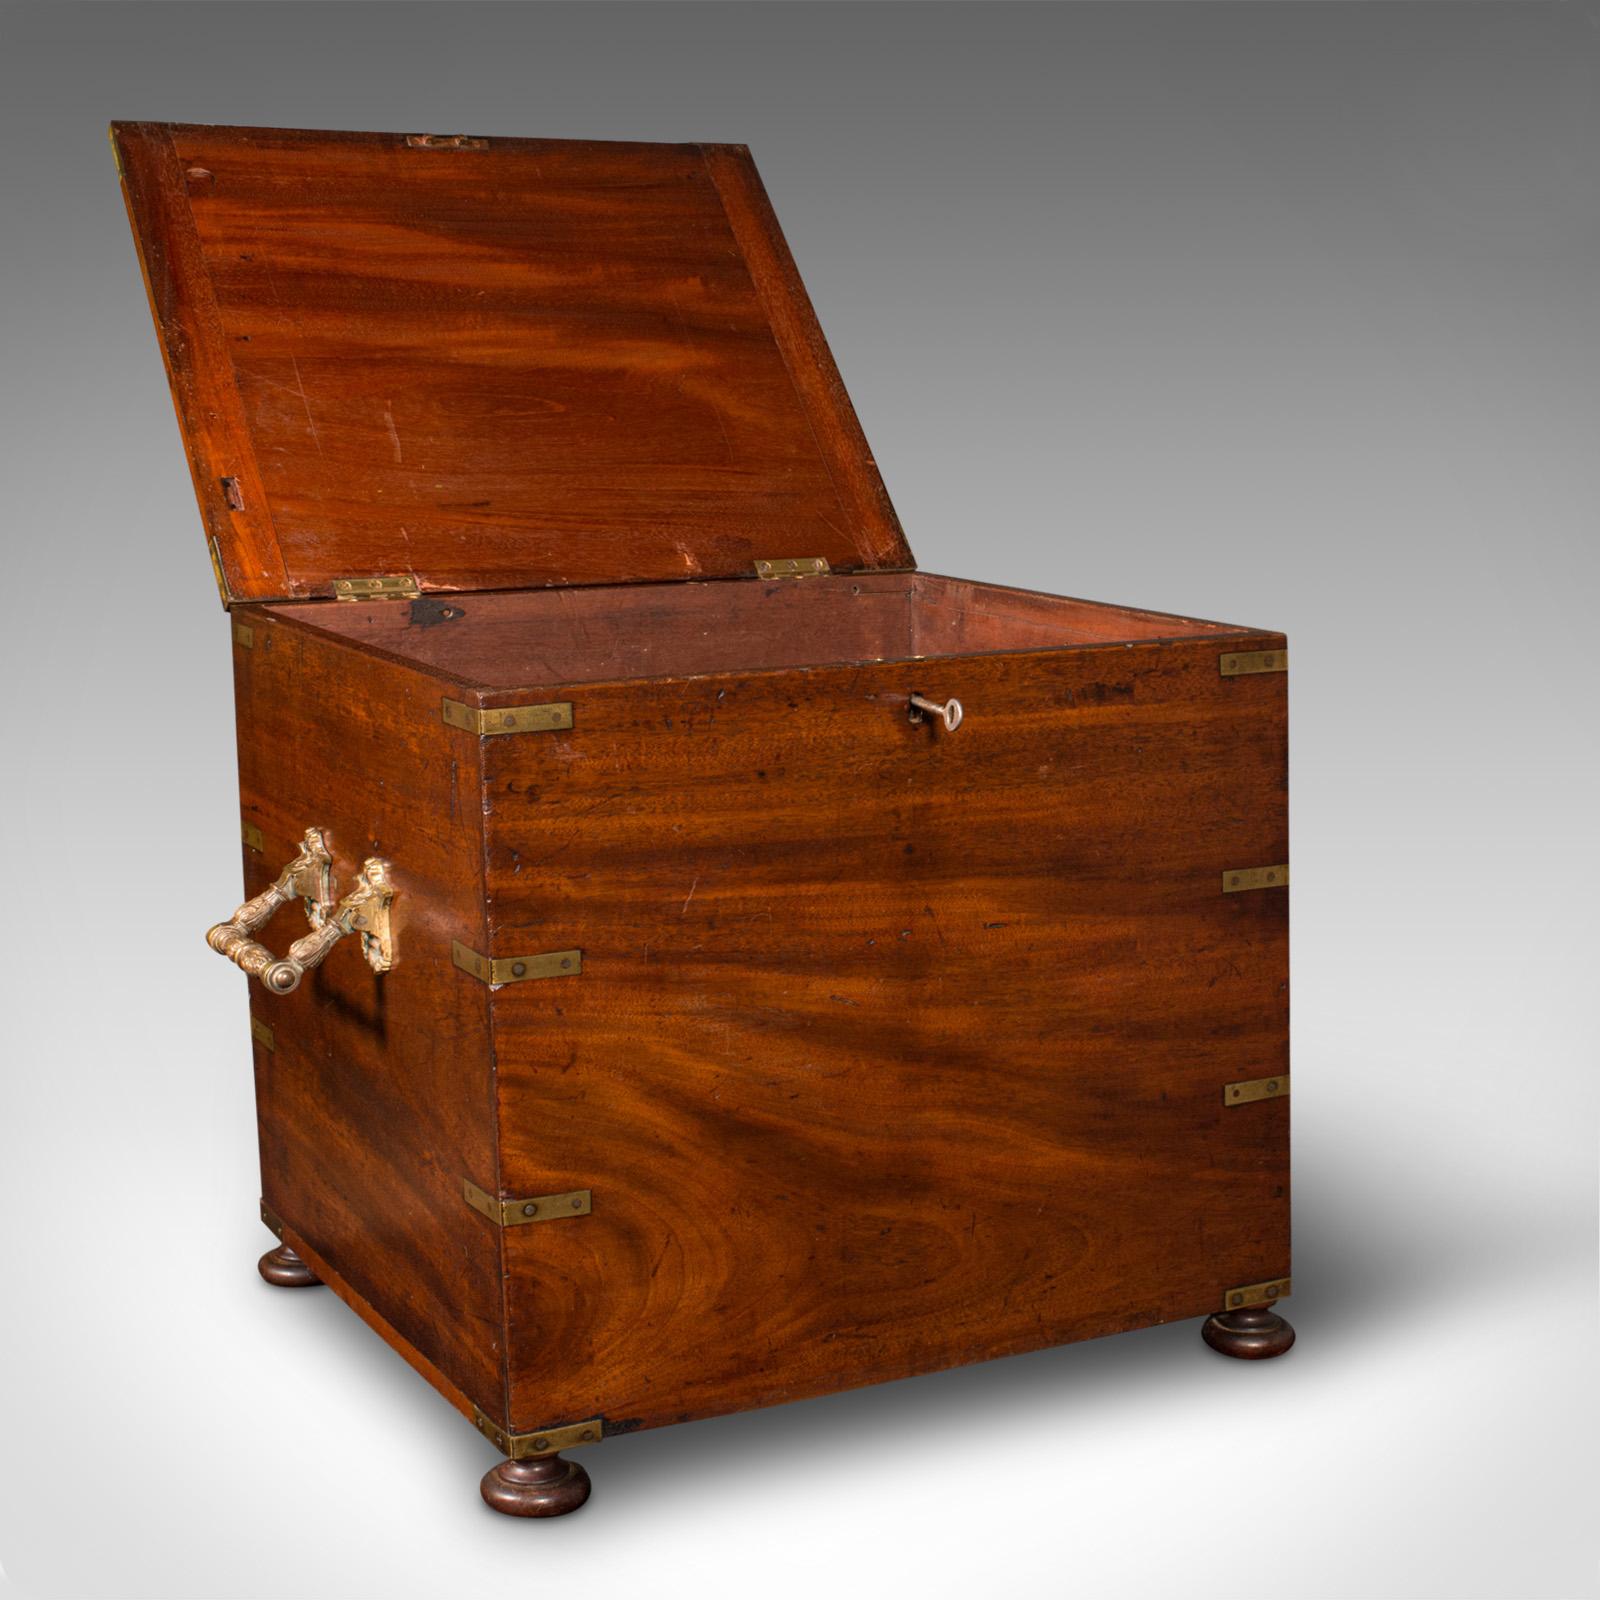 This is an antique campaign cellarette. An English, mahogany and brass colonial storage box, dating to the mid Victorian period, circa 1850.

Impressive proportion and of a quality finish and appearance
Displays a desirable aged patina and in good